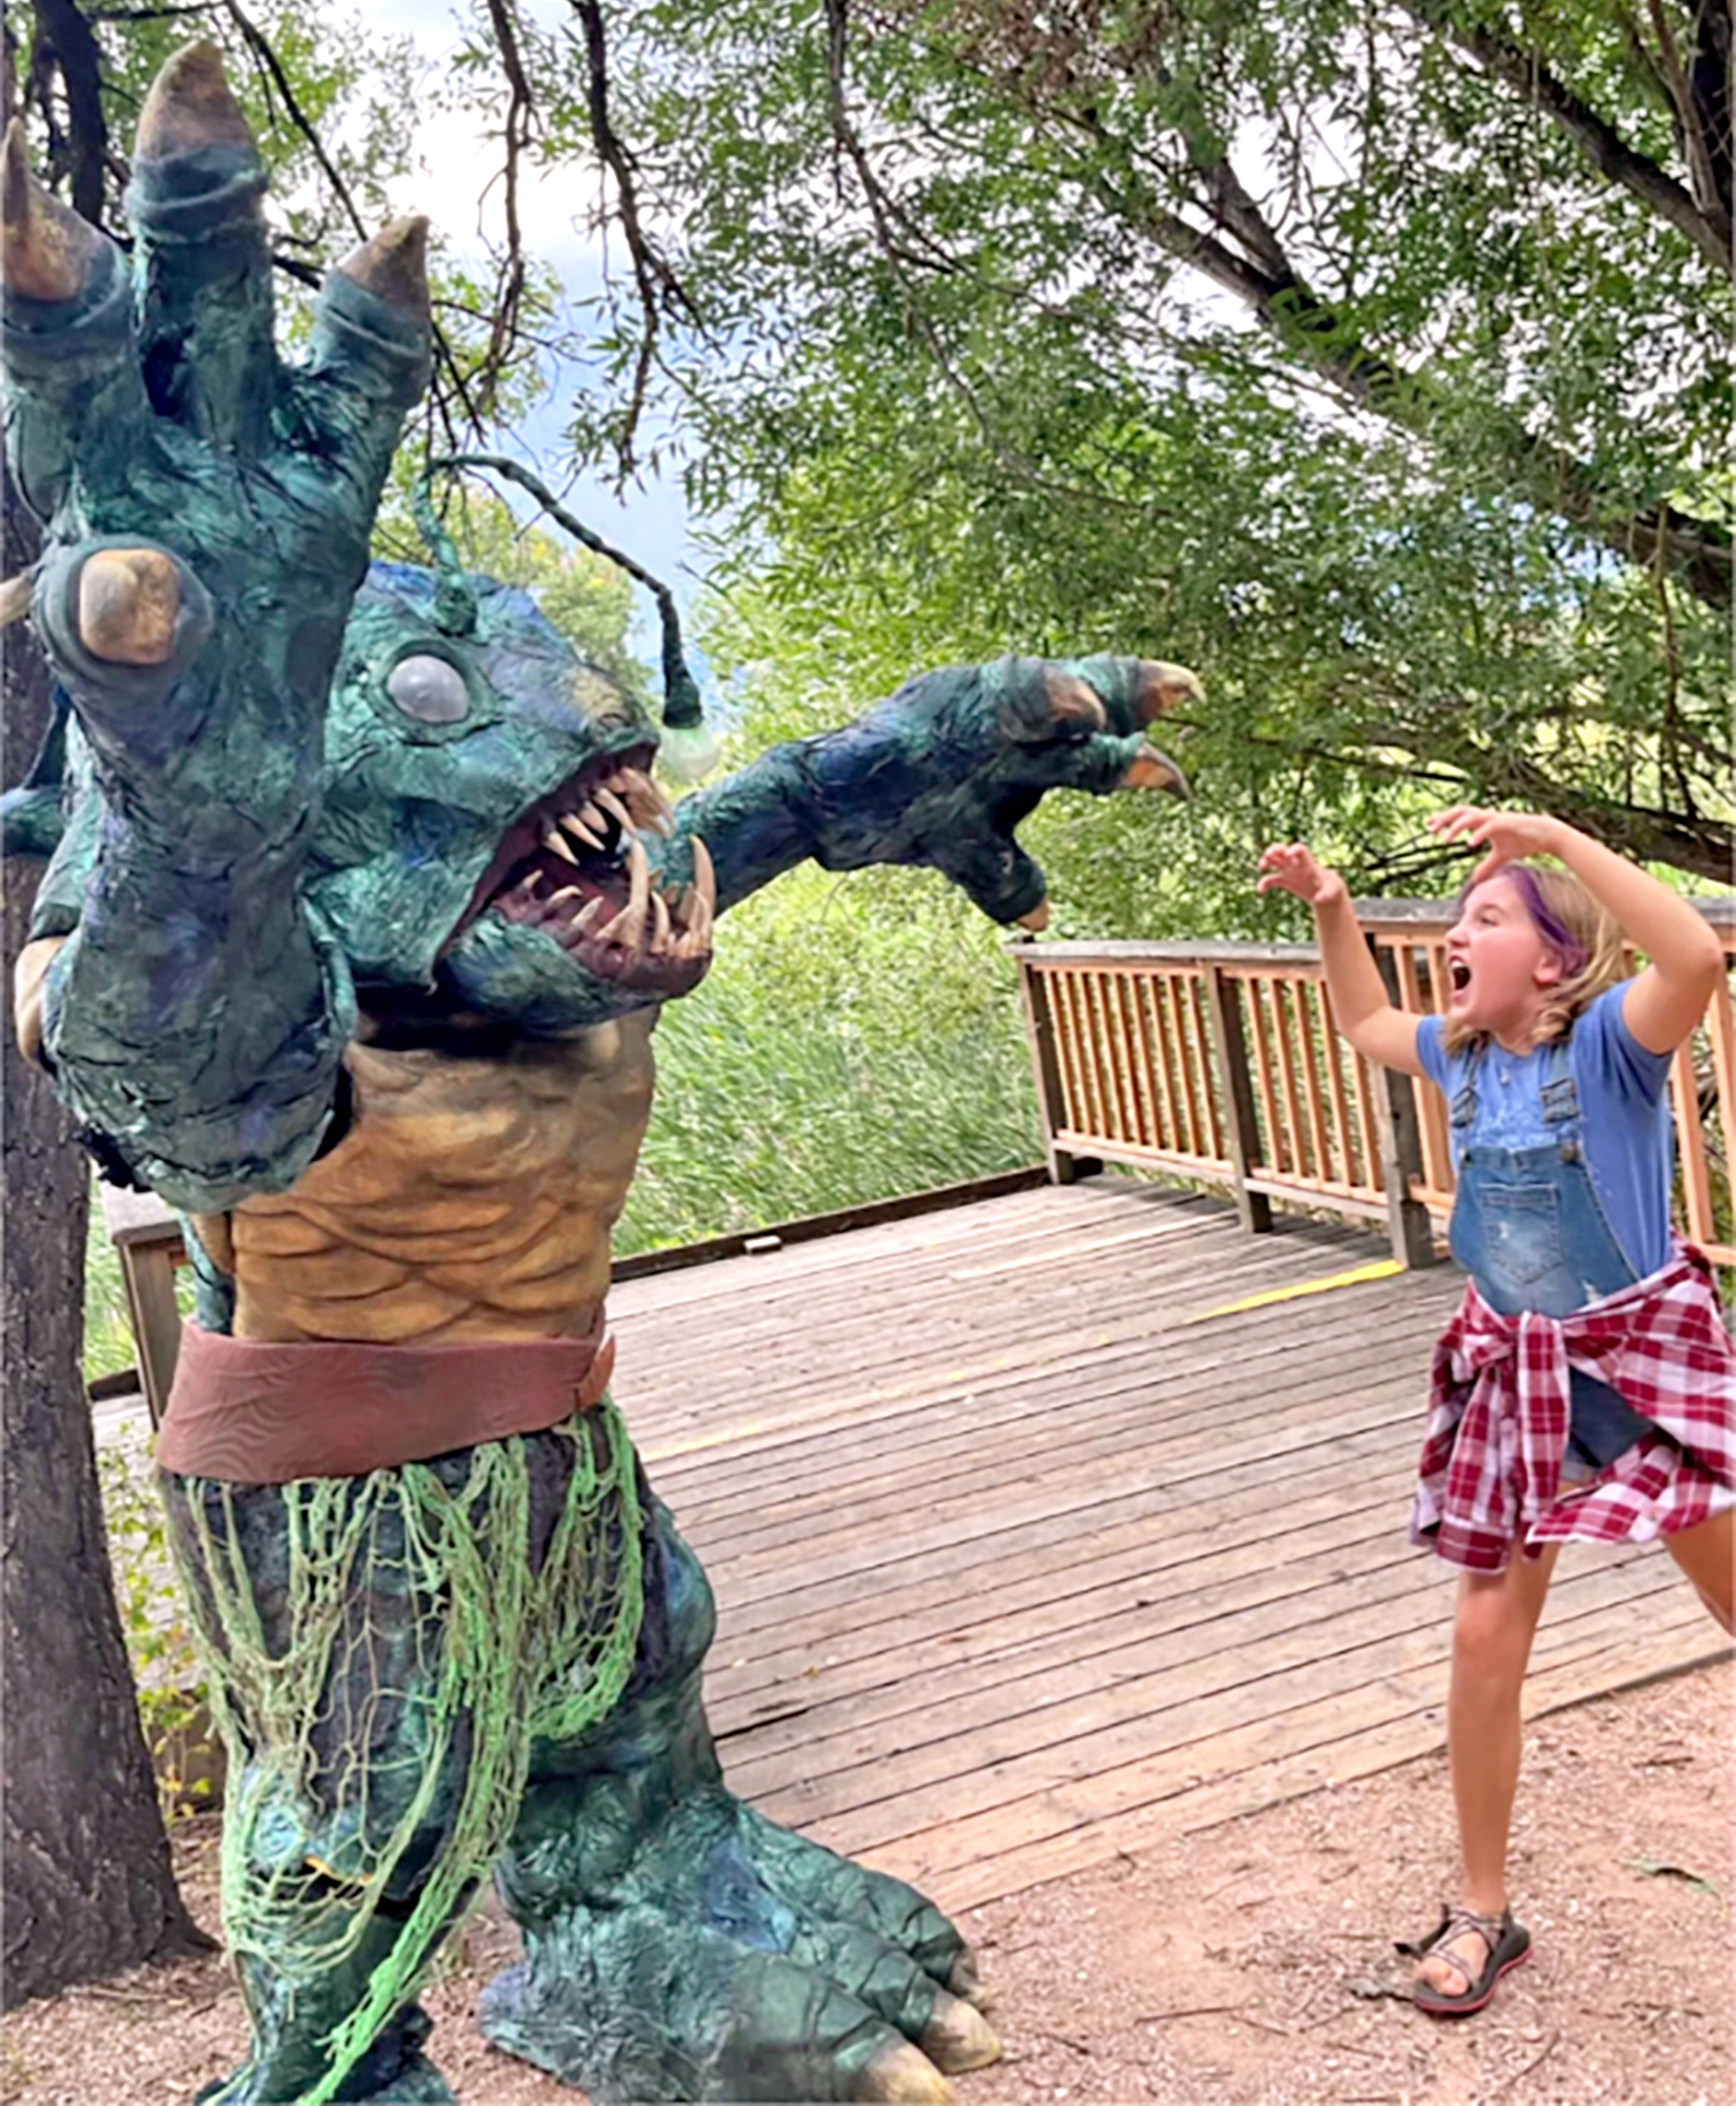 Courtesy image. Teagan Hodur reacts to a sea monster played by Ryan Wilkes in a scene from “Ghost Fish: The Legend of the Lake.”